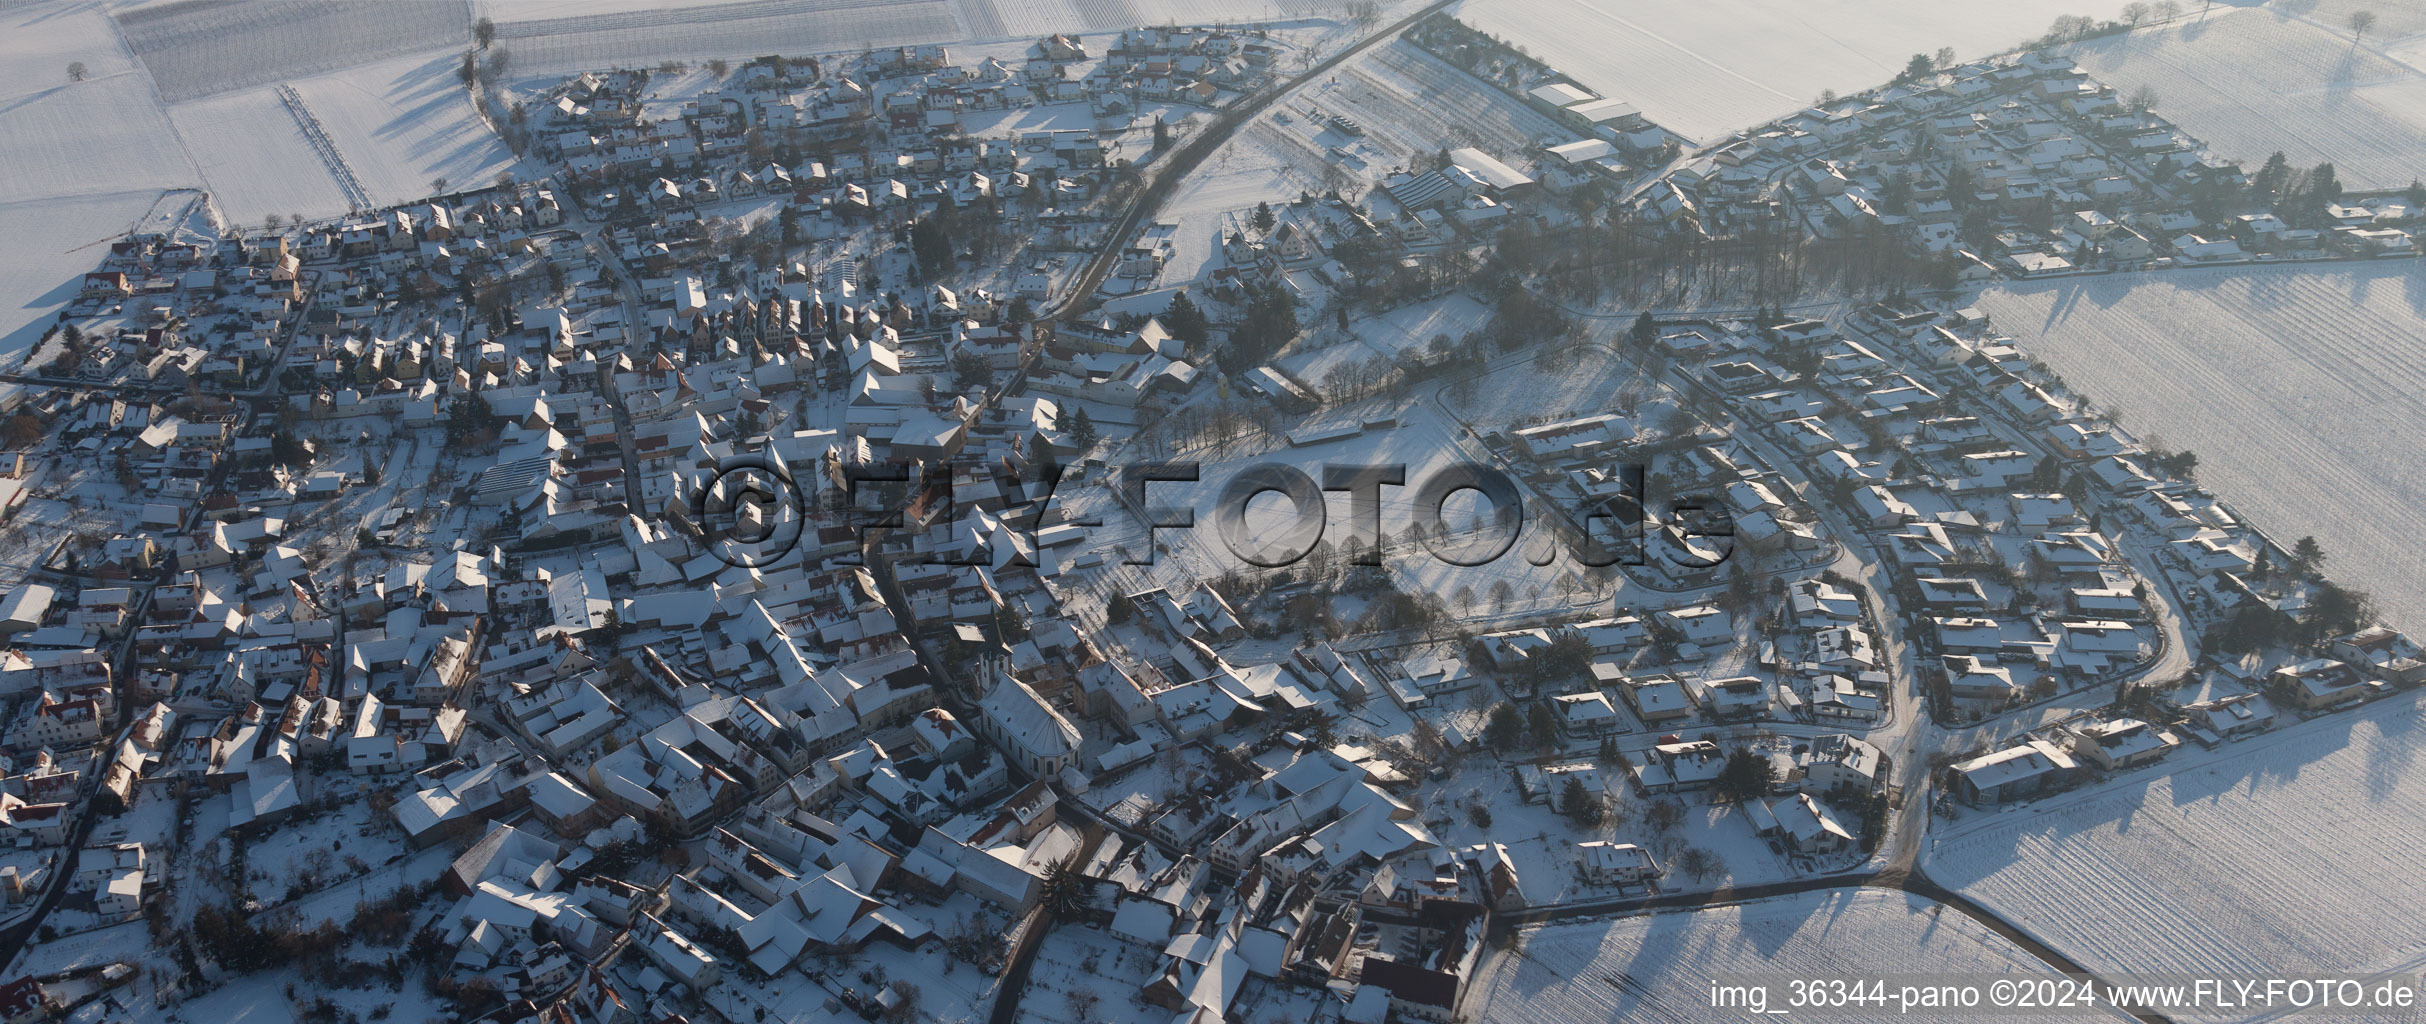 Oblique view of Wintry snowy Village - view on the edge of agricultural fields and farmland in the district Moerzheim in Landau in der Pfalz in the state Rhineland-Palatinate, Germany